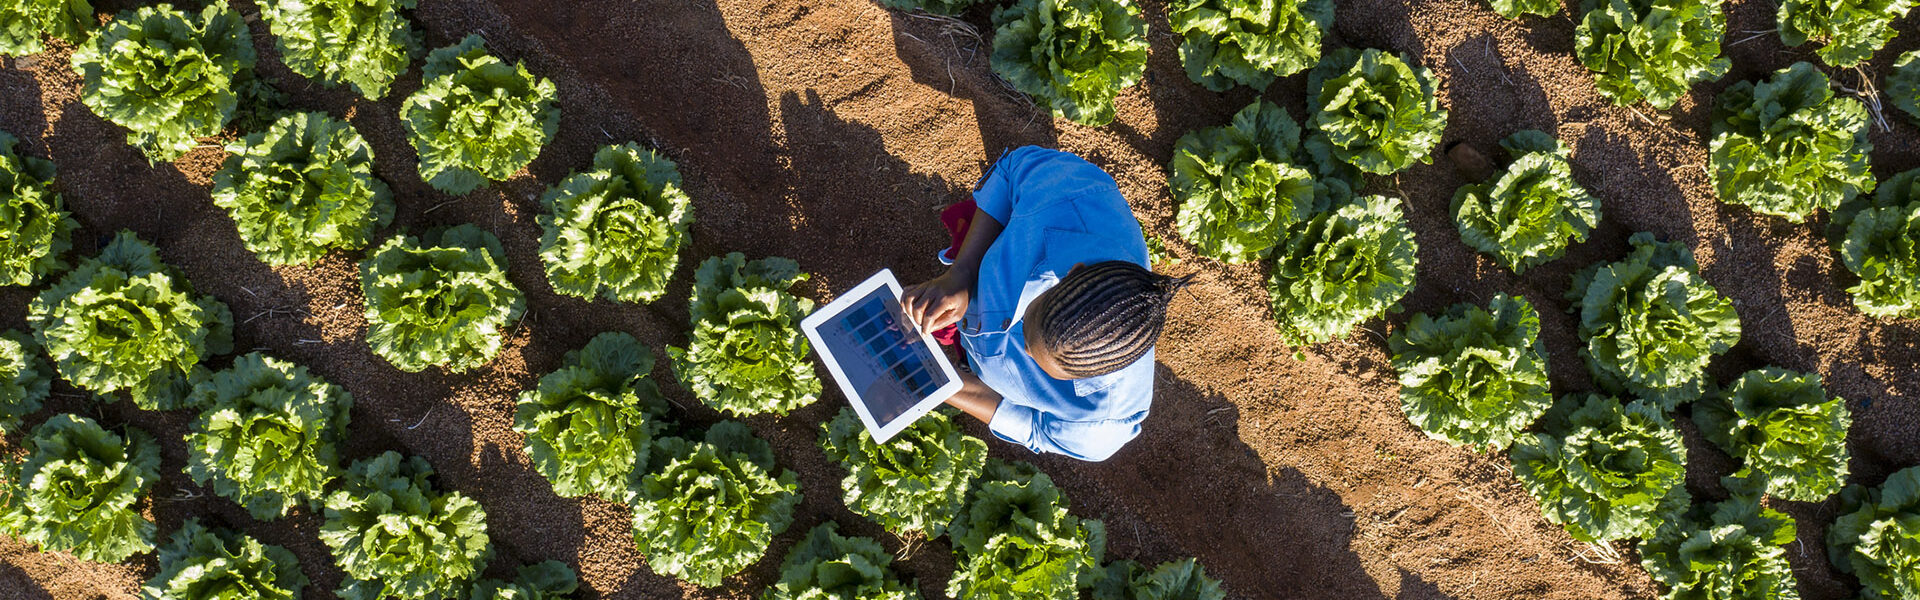 Digitalizing Food Security: AI and Digital Twins Balance Farm-to-Consume Value Chains